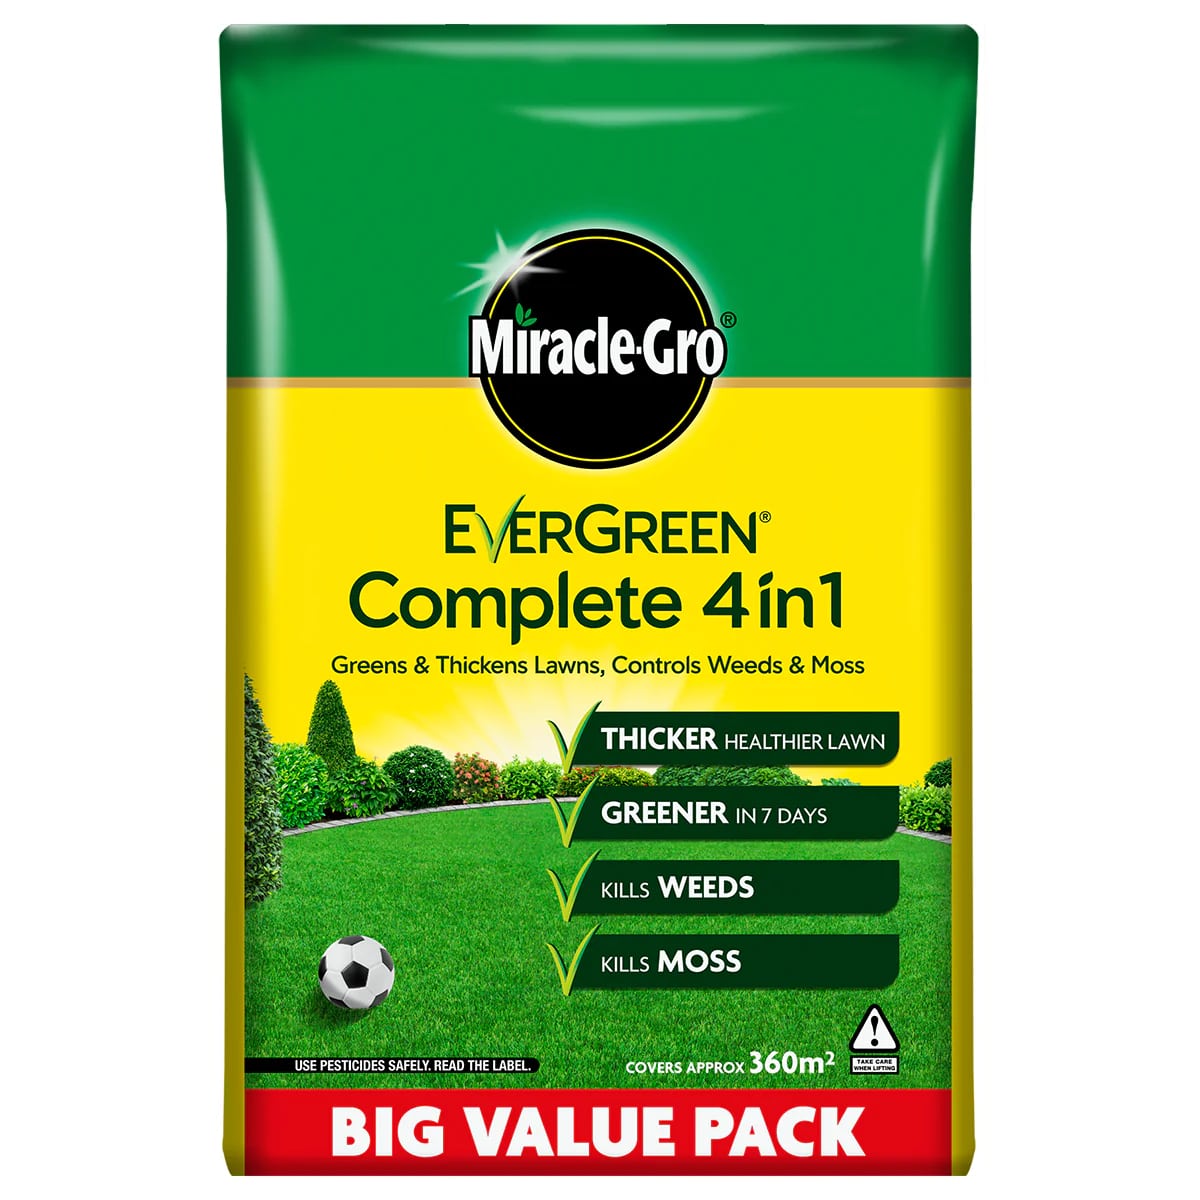 Evergreen Miracle-Gro Complete 4-in-1 360m² 12.6kg